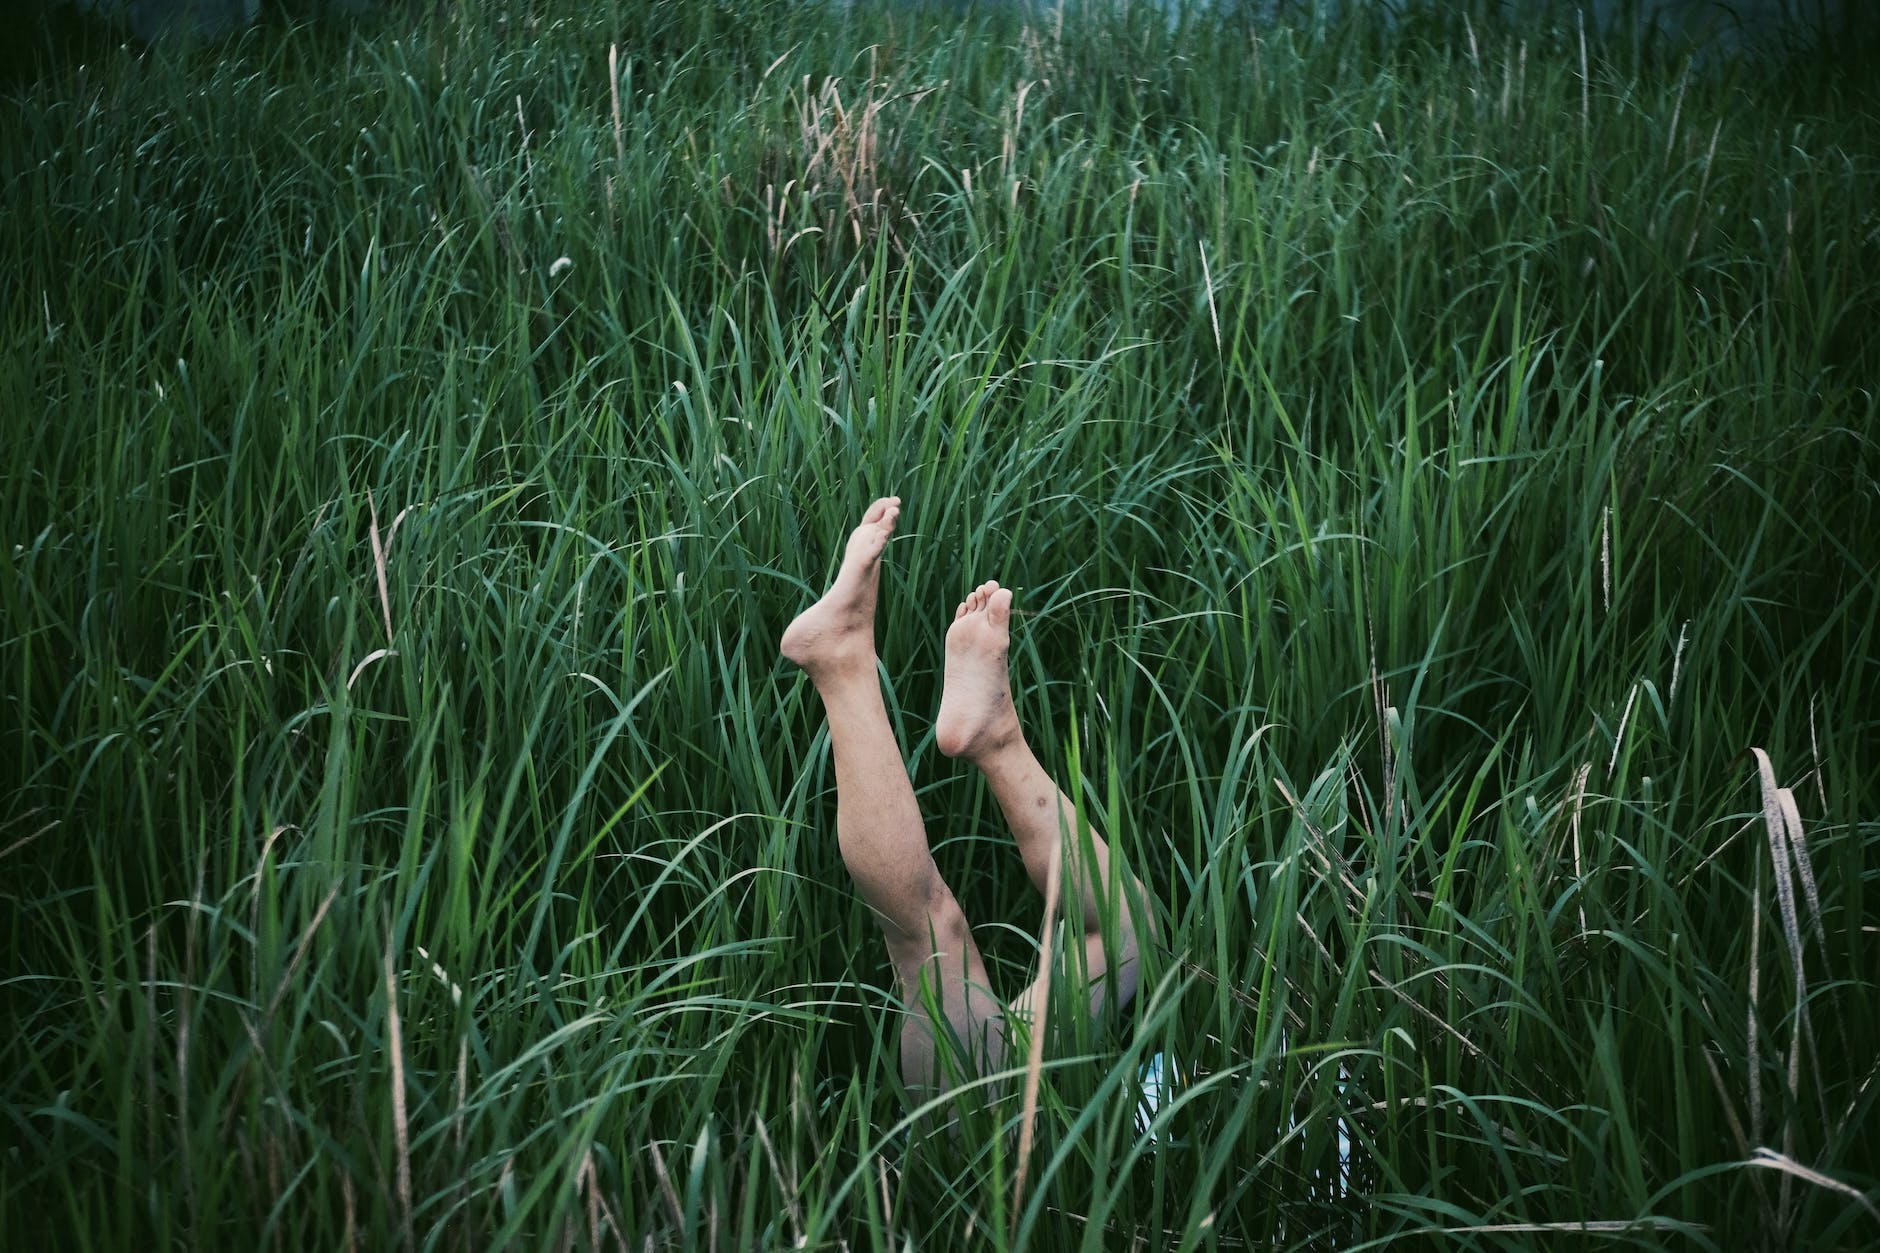 photo of person s legs surrounded by blades of grass